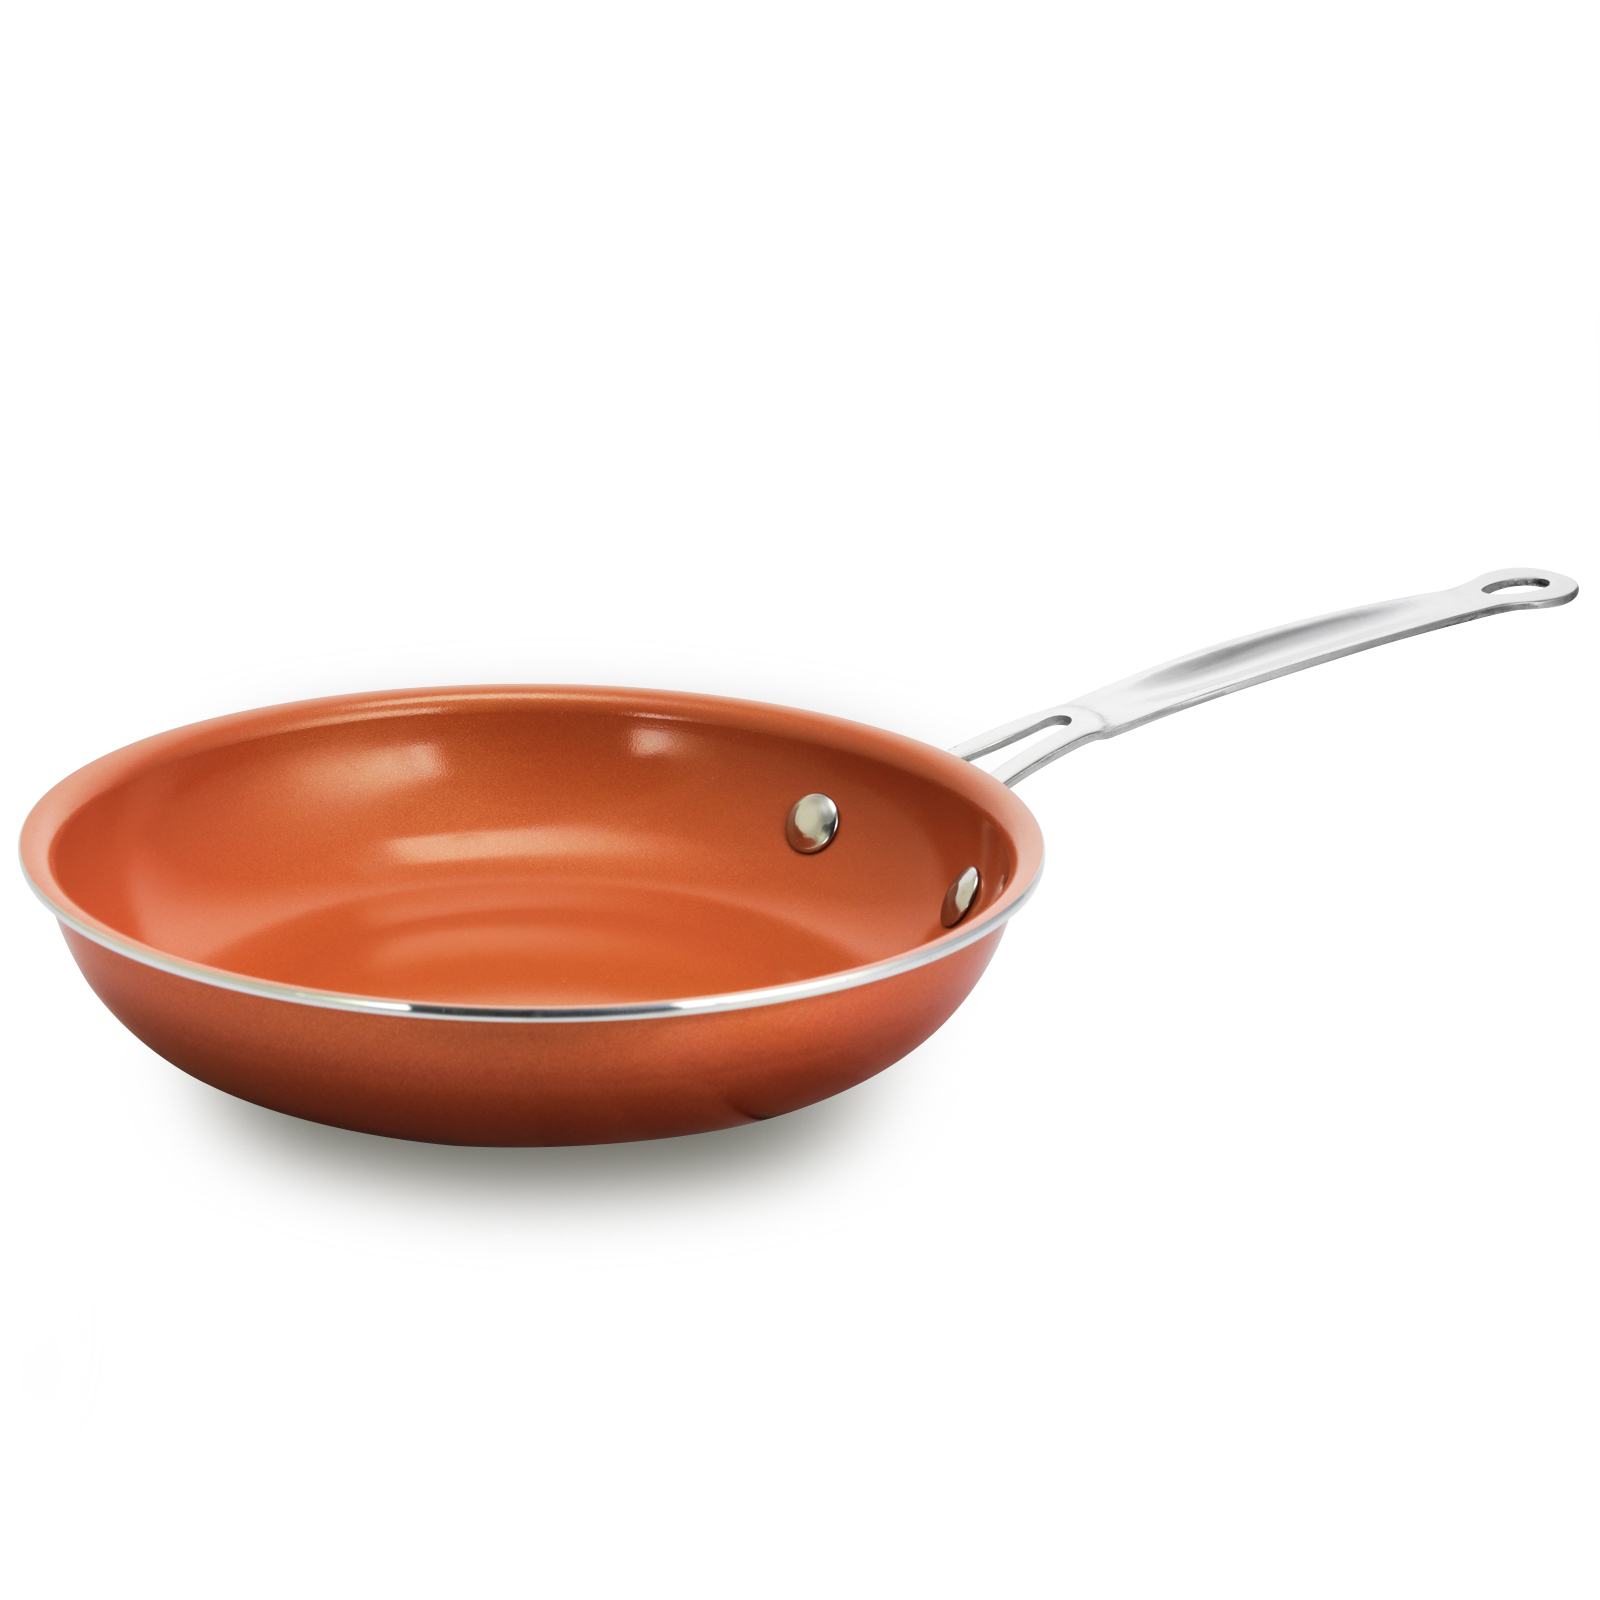 Better Chef Ceramic Coated Copper Non-Stick 8" Frying Pan